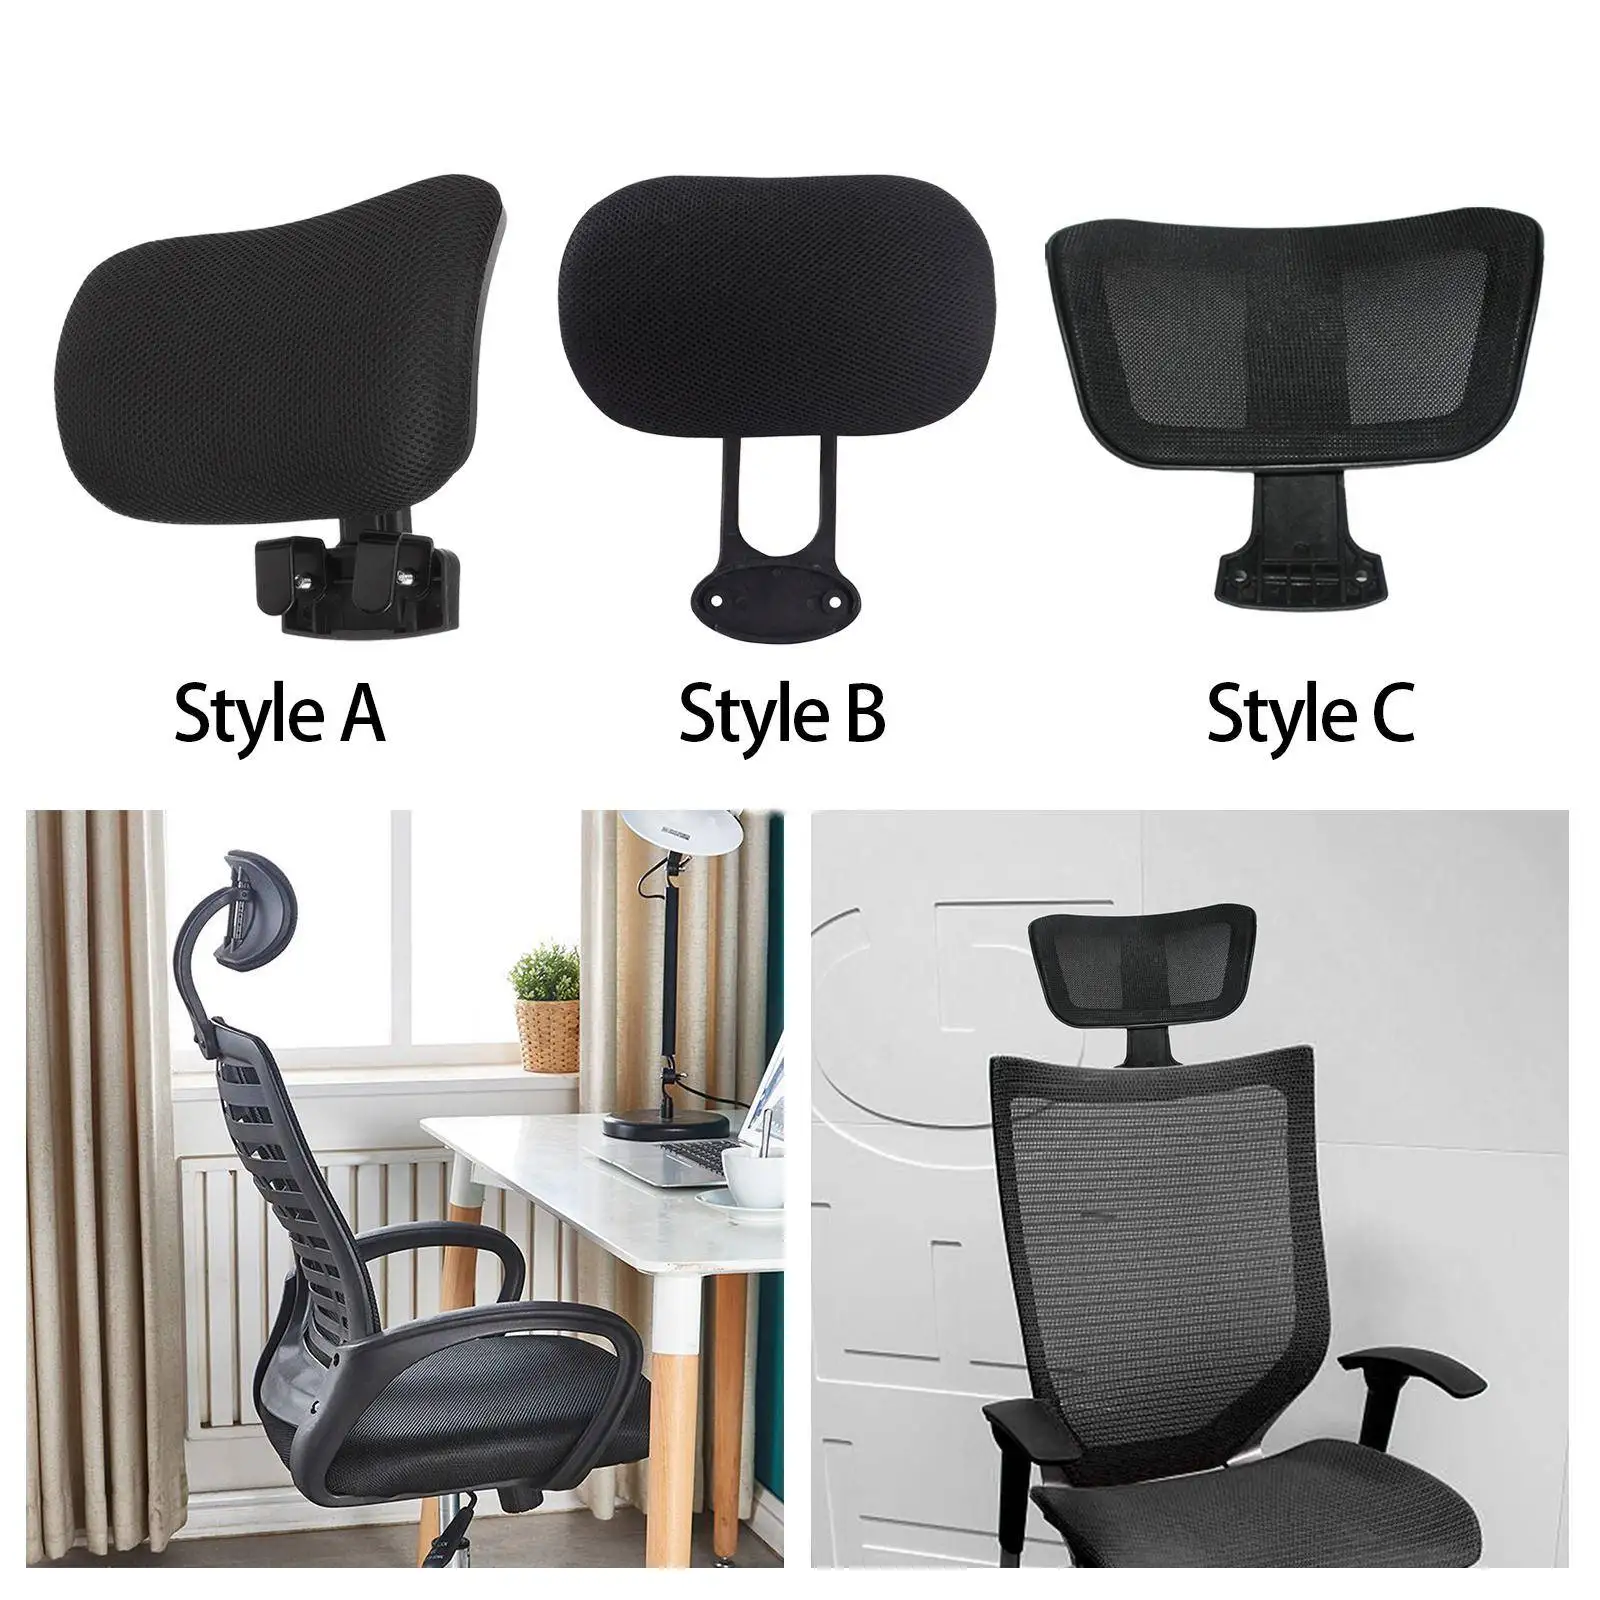 Computer Chair Headrest Durable Multifunctional Universal Attachment Height Angle Adjust for Rest Home Any Desk Chair Headrest